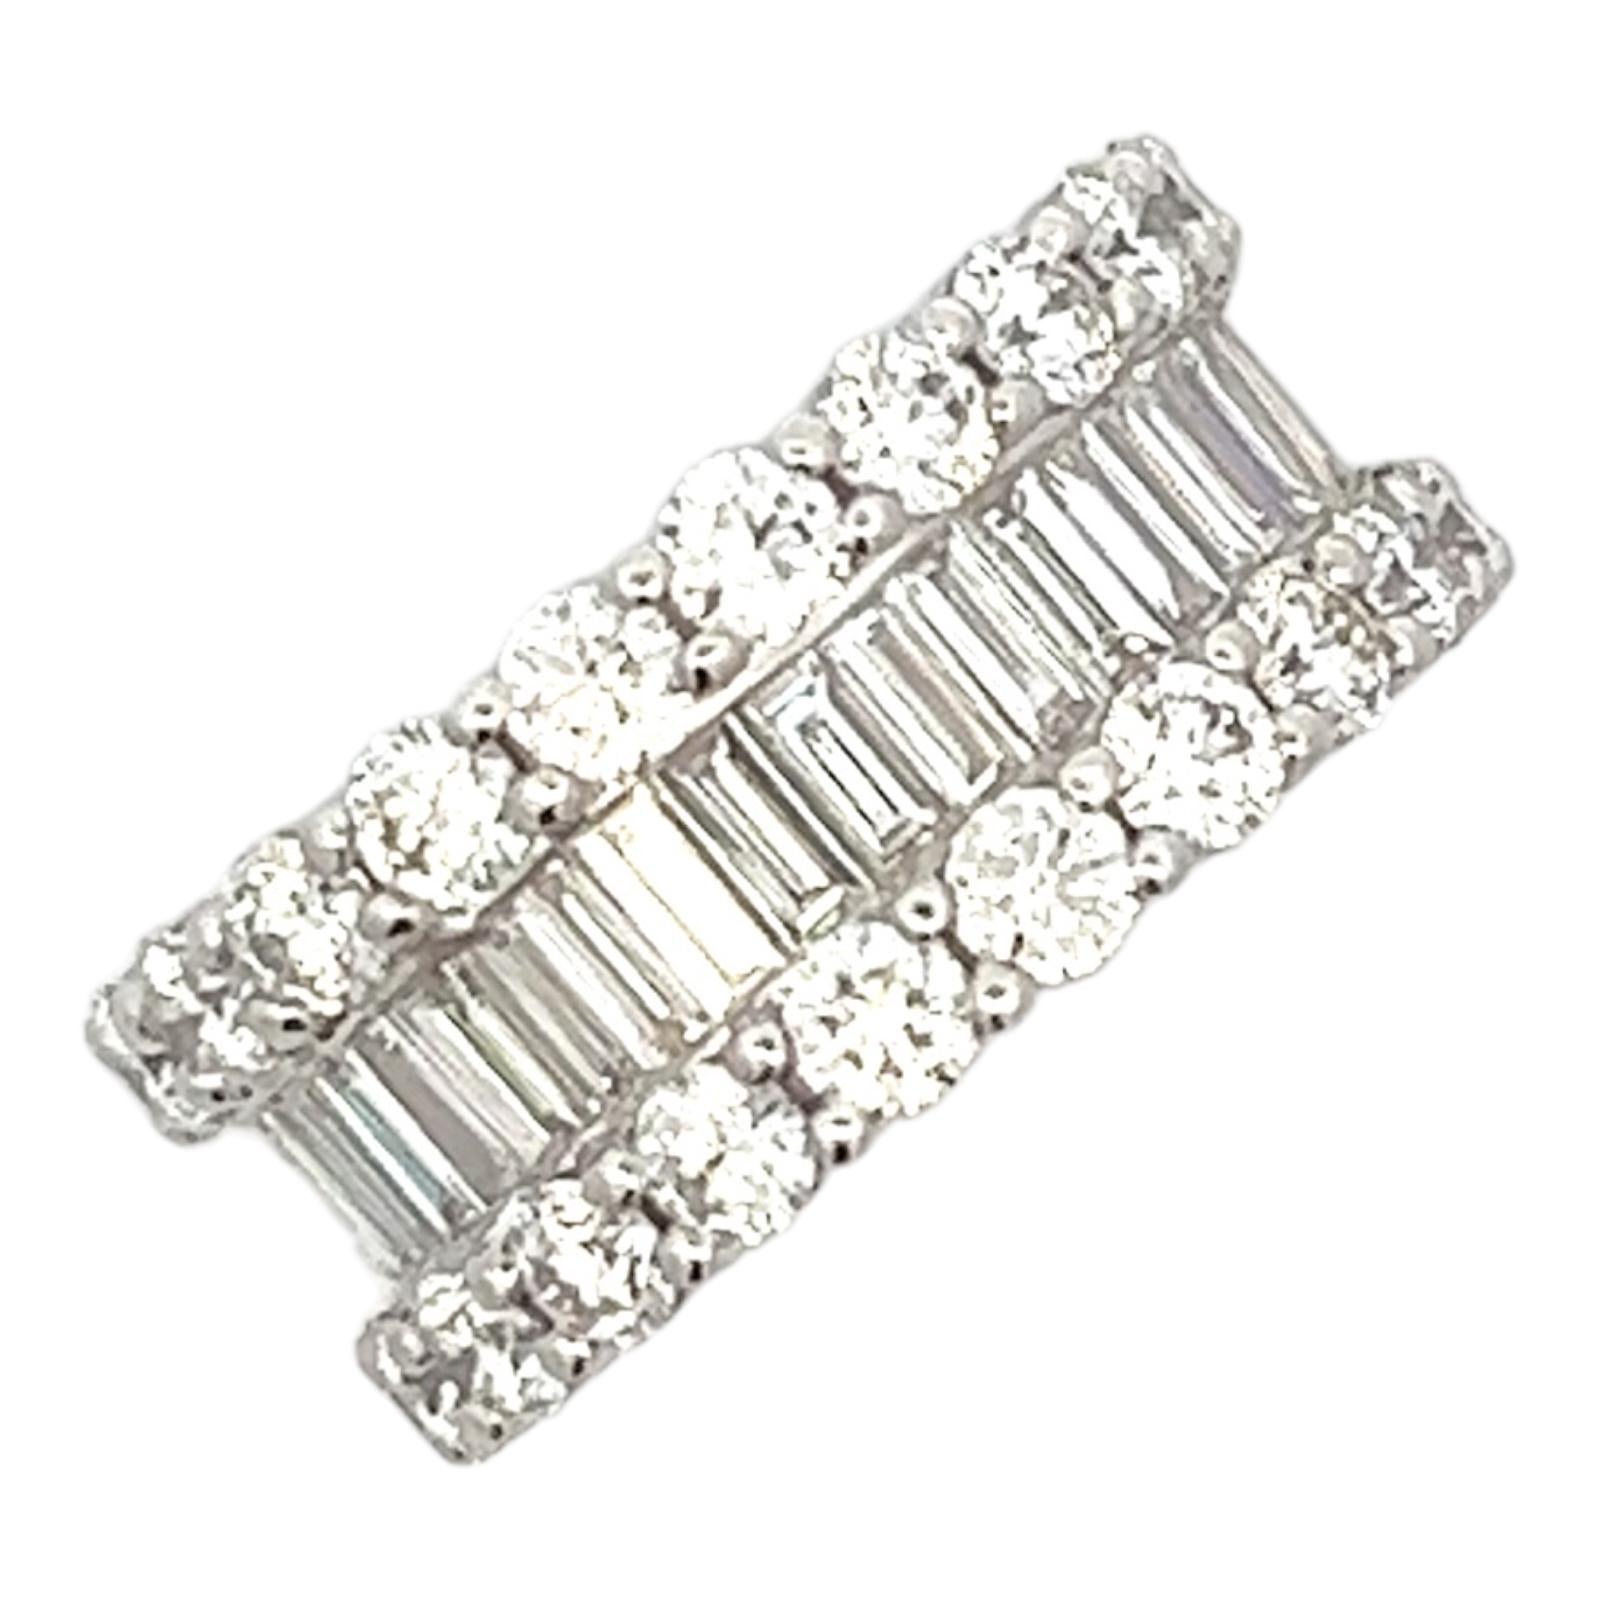 Beautiful wide diamond eternity wedding band handcrafted in 18 karat white gold. The band features 42 baguette and 42 round brilliant cut diamonds weighing approximately 7.76 carat total weight and graded G color and VS1 clarity. The band measures